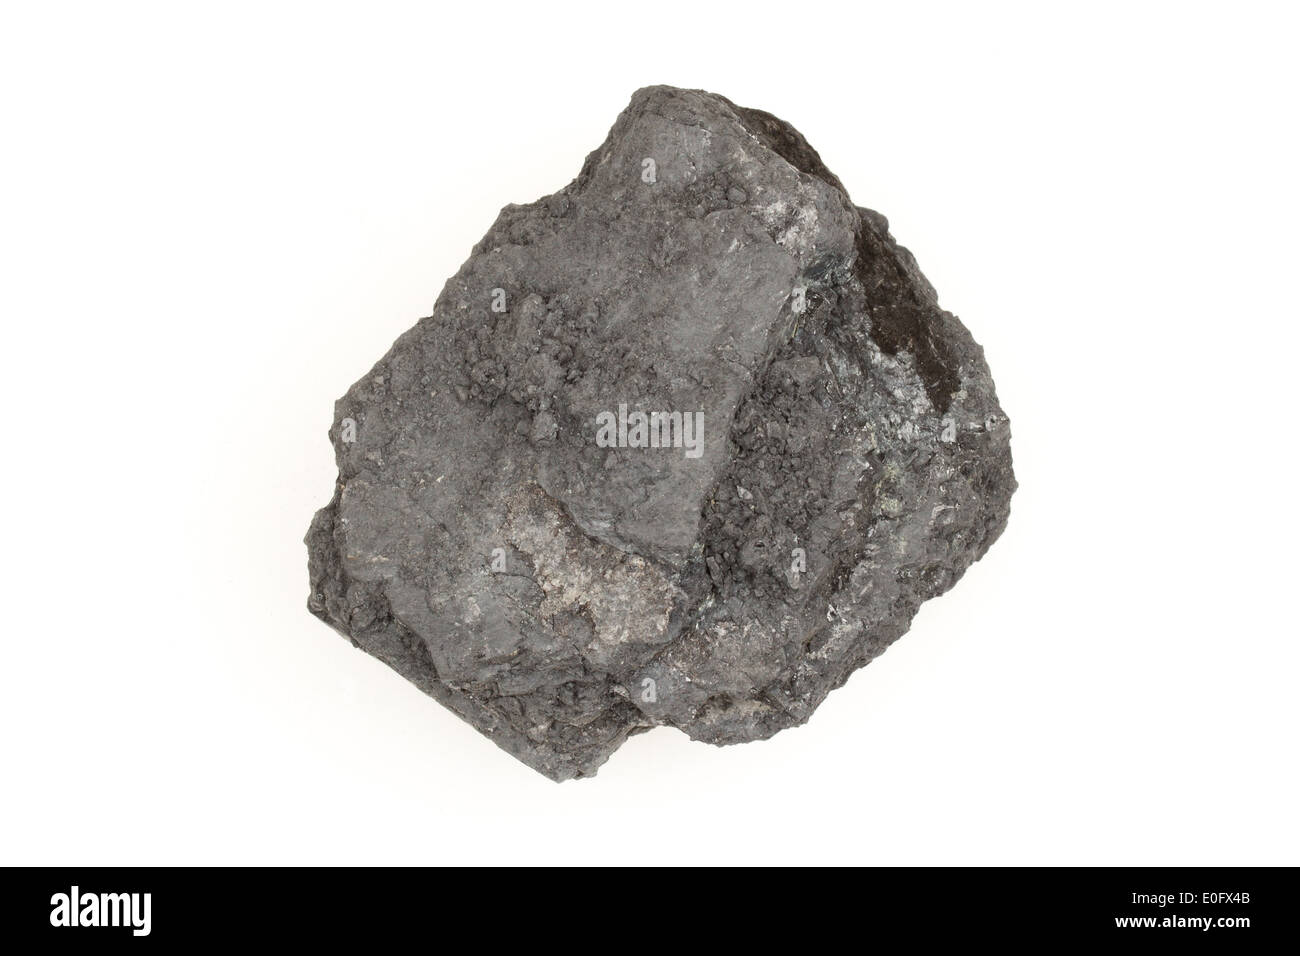 Rough specimen of black coal, a combustible sedimentary rock on a white background Stock Photo